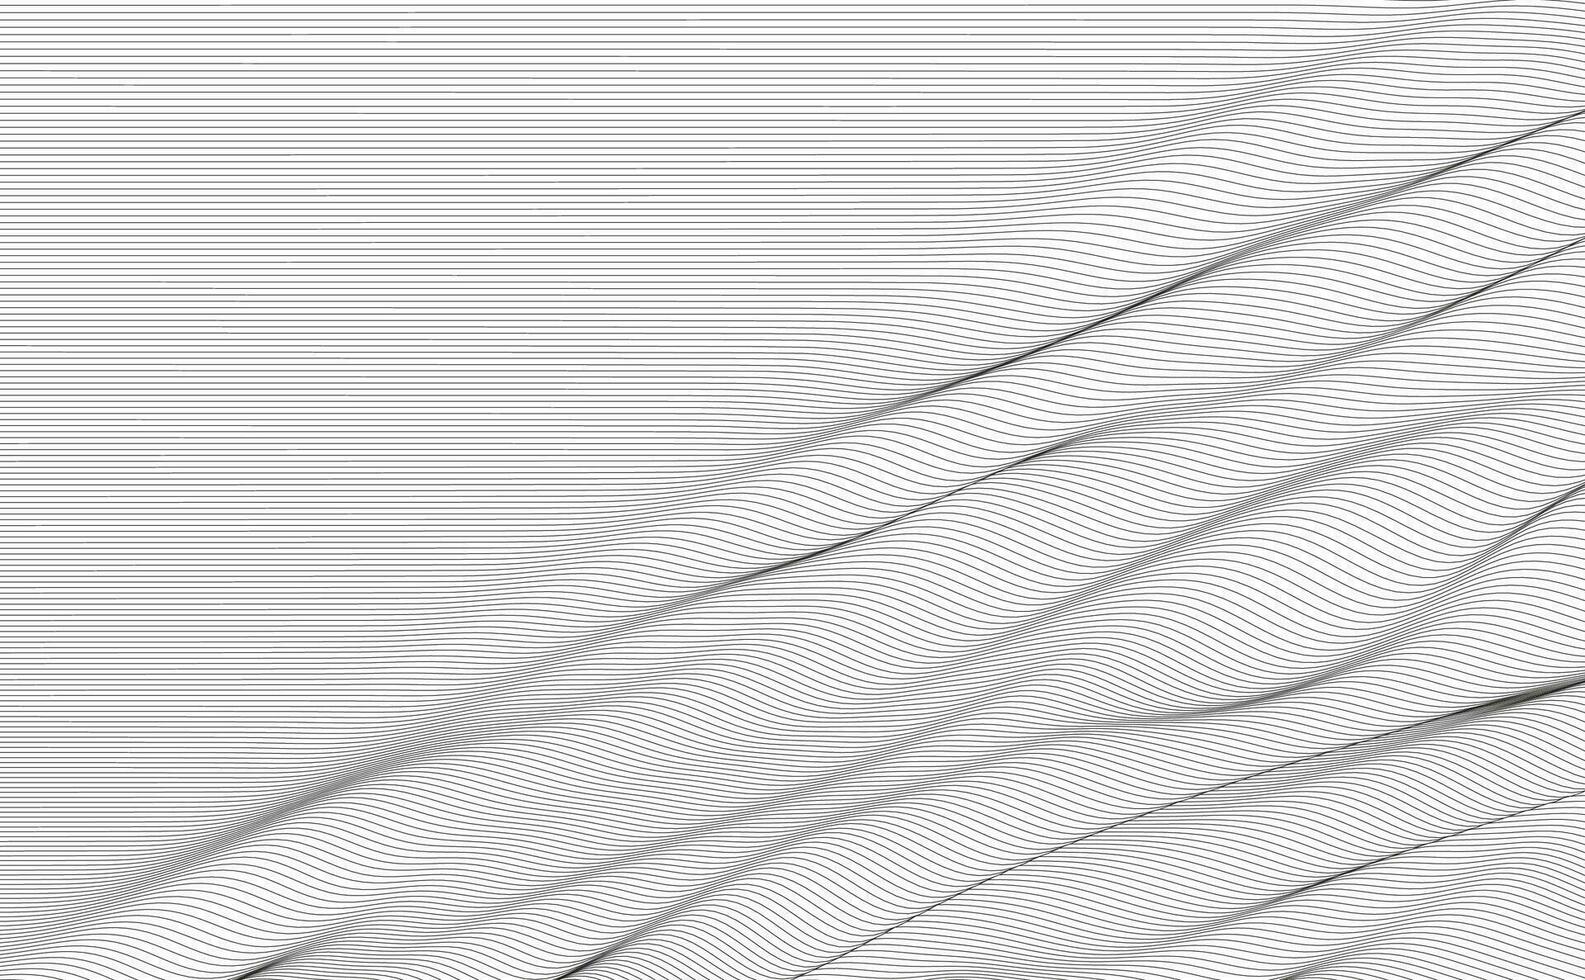 Abstract continuous lines drawing on white as background. Vector